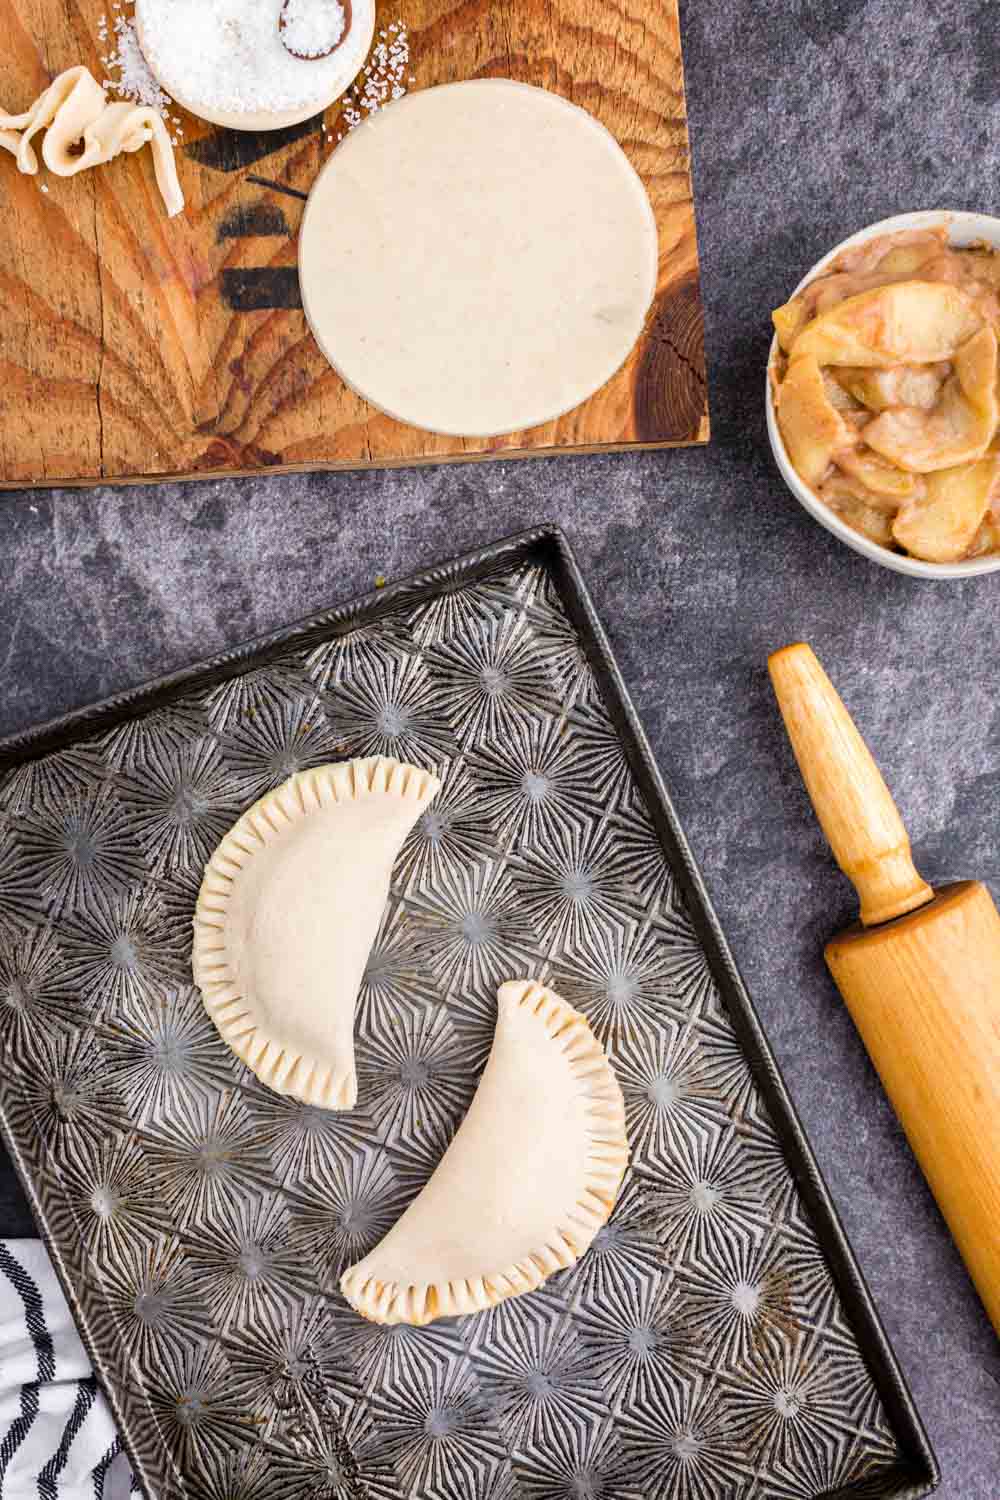 Baking tray with two unbaked apple hand pies, pin roll, bowl with apple pie filling, patry circle on wooden kitchen board, bowl of sugar, striped linen on black countertop